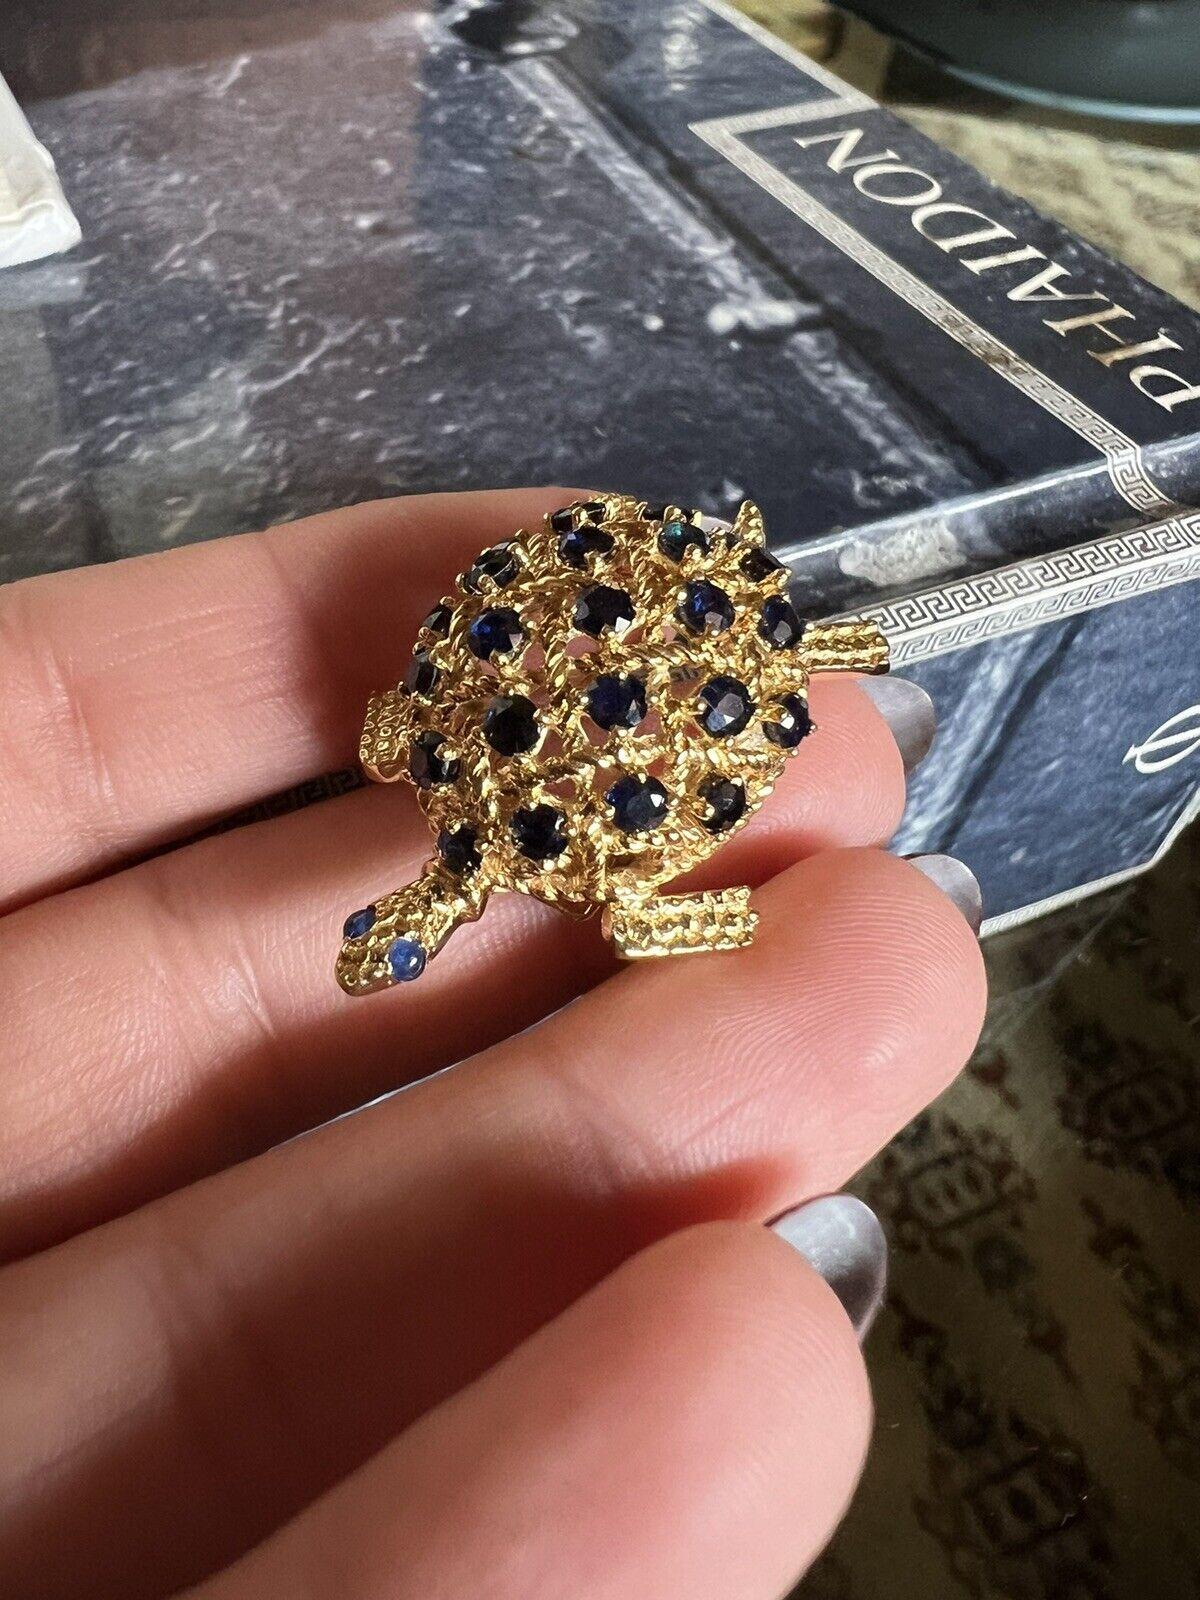 Cartier 18k Yellow Gold & Sapphire Turtle Clip / Brooch Retro Fully Hallmarked

Here is your chance to purchase a beautiful and highly collectible designer clip / brooch.  

There are 23 round sapphires, all natural.  The eyes are a lighter blue and